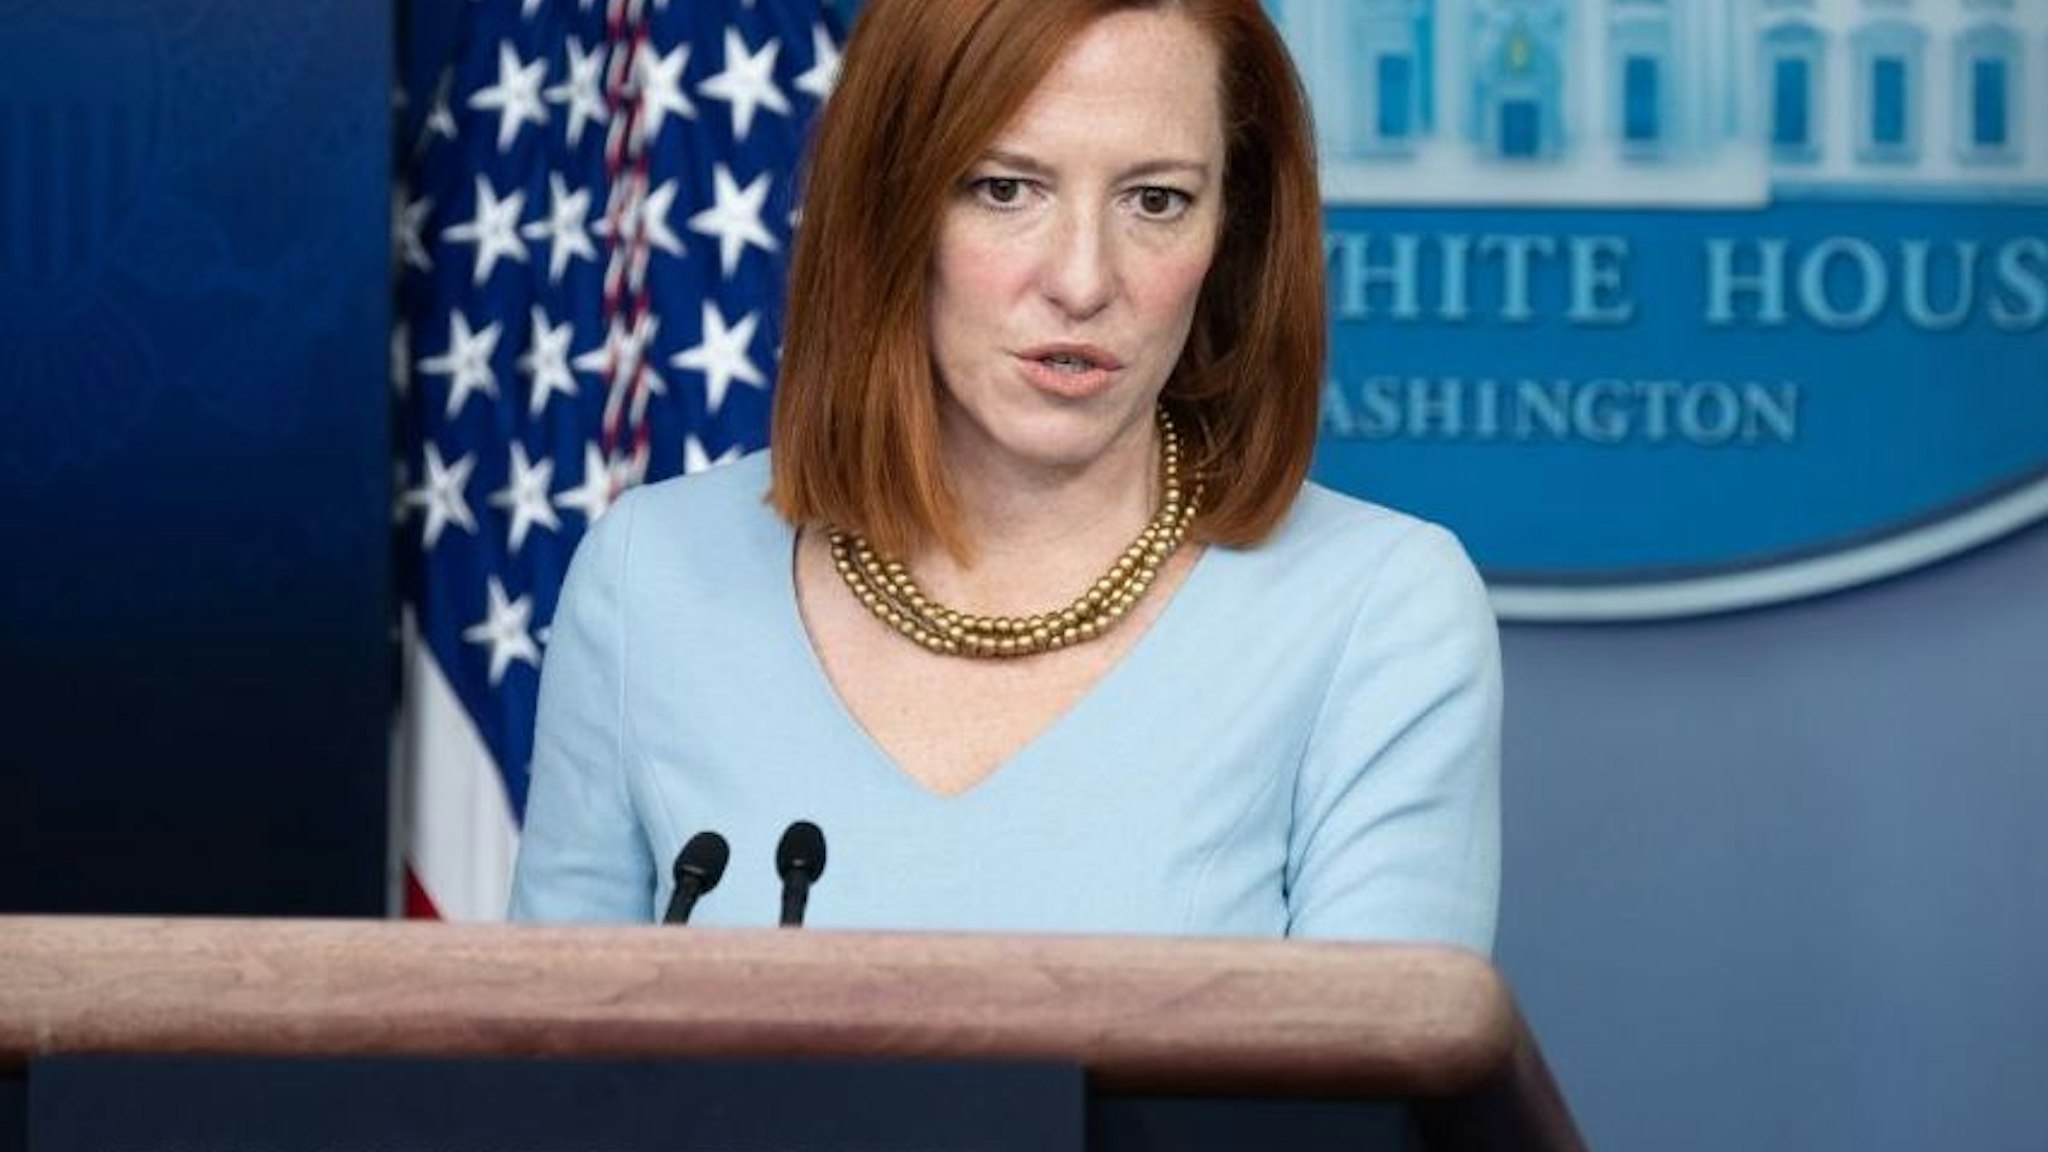 White House Press Secretary Jen Psaki holds a press briefing in the Brady Briefing Room of the White House in Washington, DC. on February 10, 2021. (Photo by SAUL LOEB / AFP) (Photo by SAUL LOEB/AFP via Getty Images)